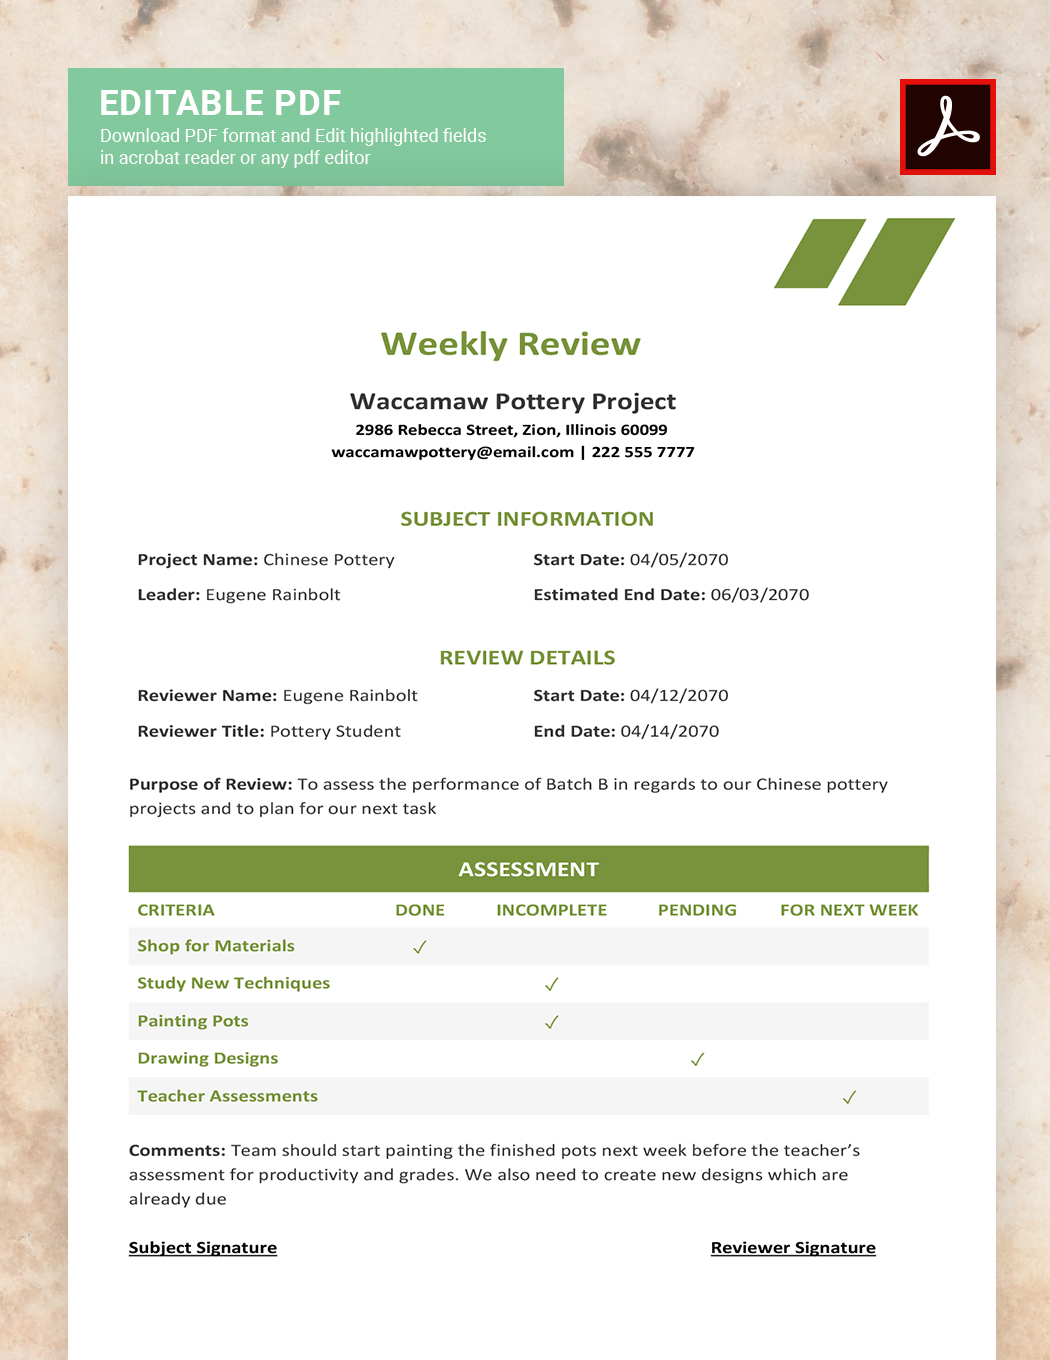 Weekly Review Template Download in Word, Google Docs